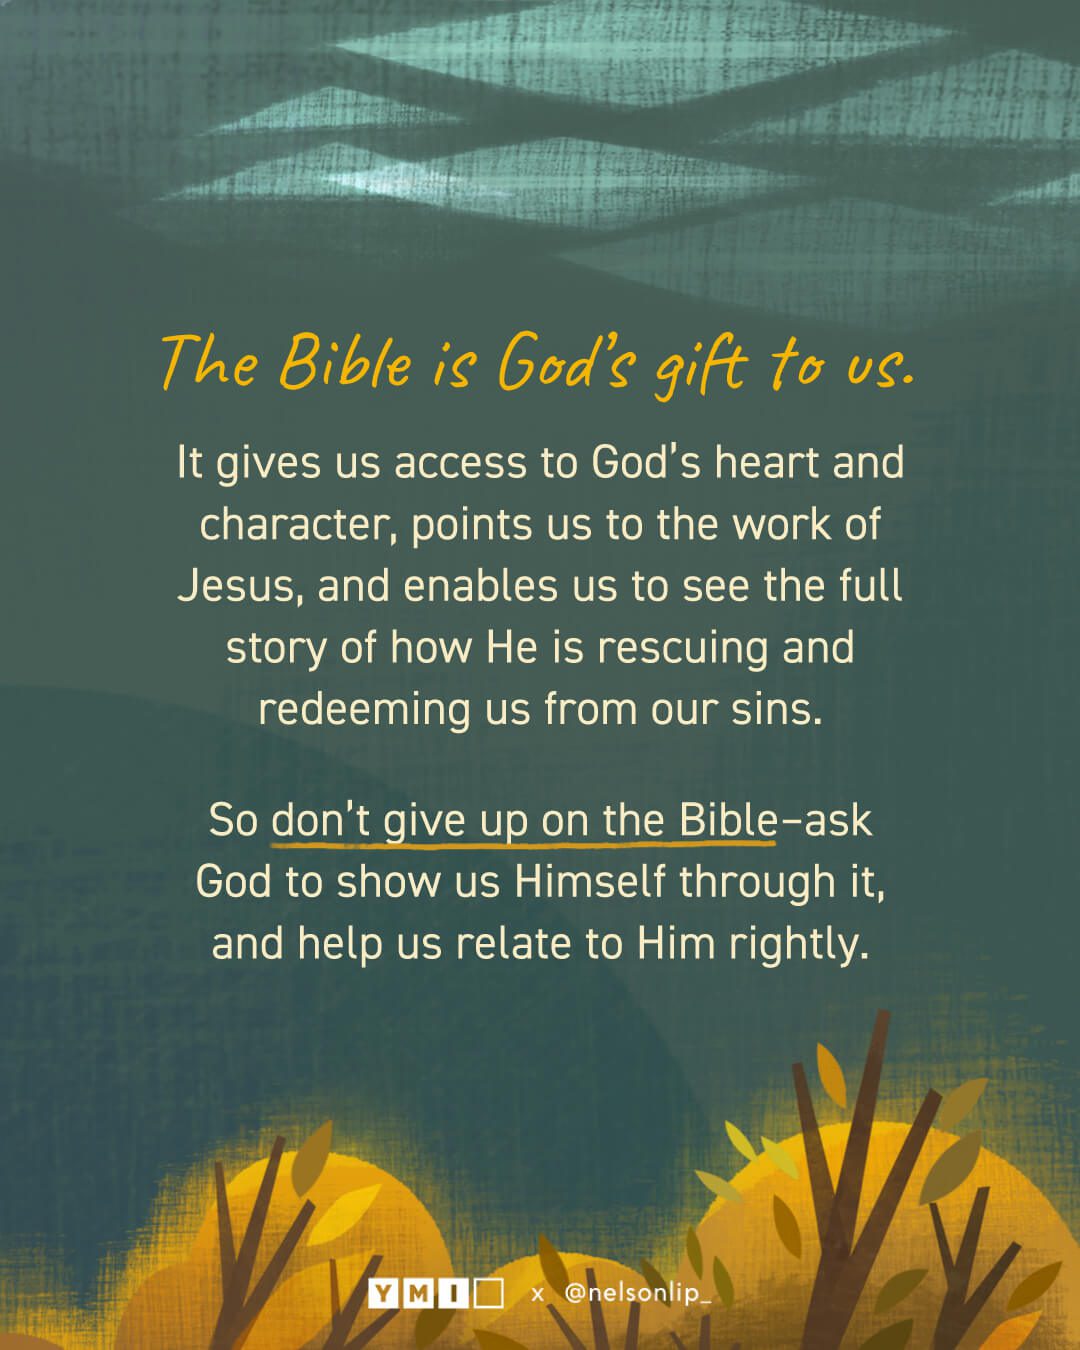 Background with the text of "The Bible is God’s gift to us. It gives us access to God’s heart and character, points us to the work of Jesus, and enables us to see the full story of how He is rescuing and redeeming us from our sins. So don’t give up on the Bible–ask God to show us Himself through it, and help us relate to Him rightly." 